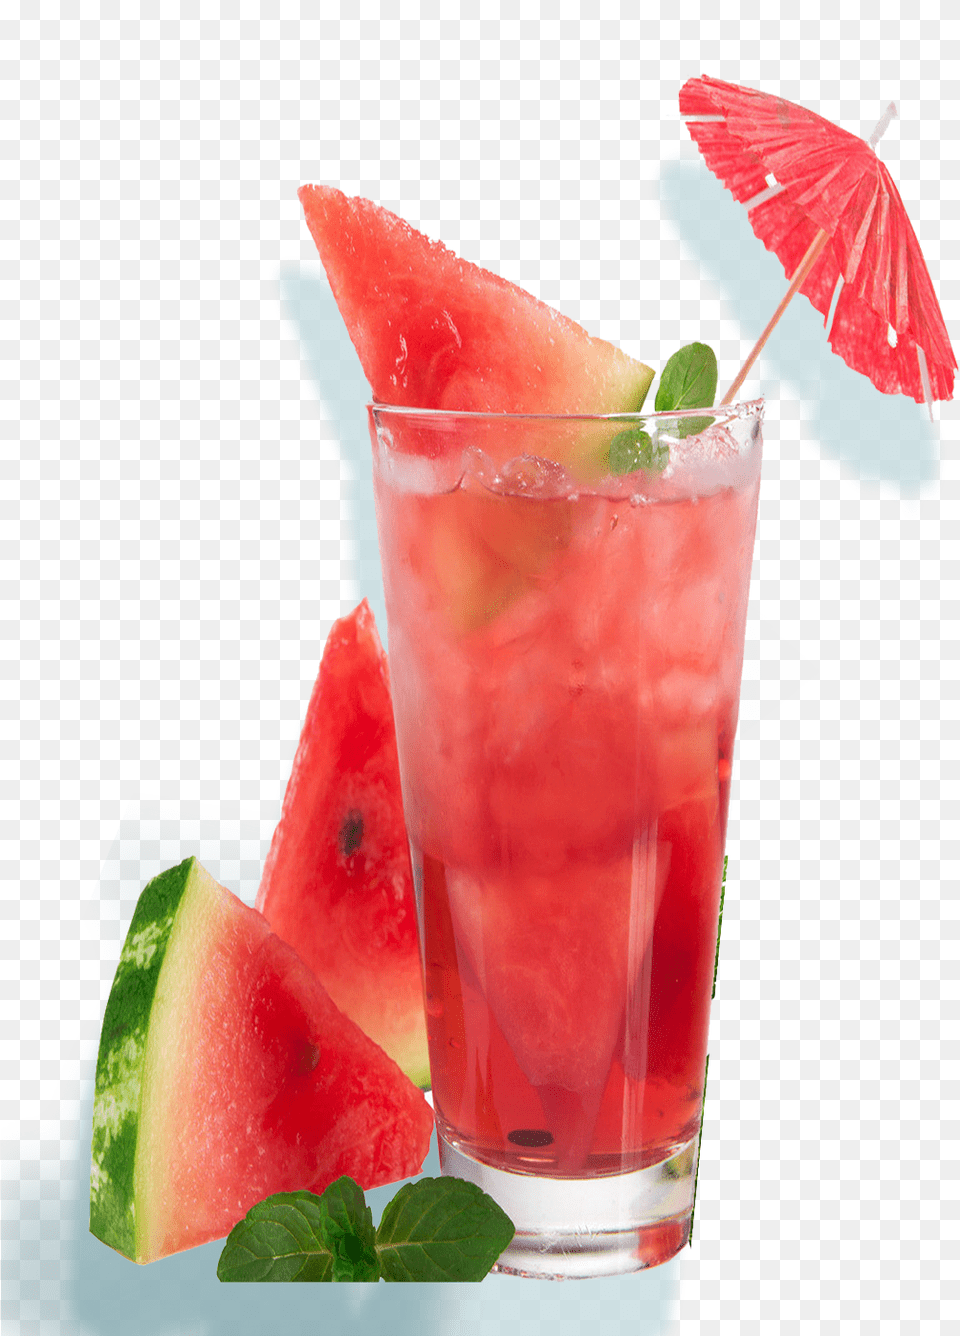 Report Abuse Watermelon Juice, Food, Fruit, Plant, Produce Png